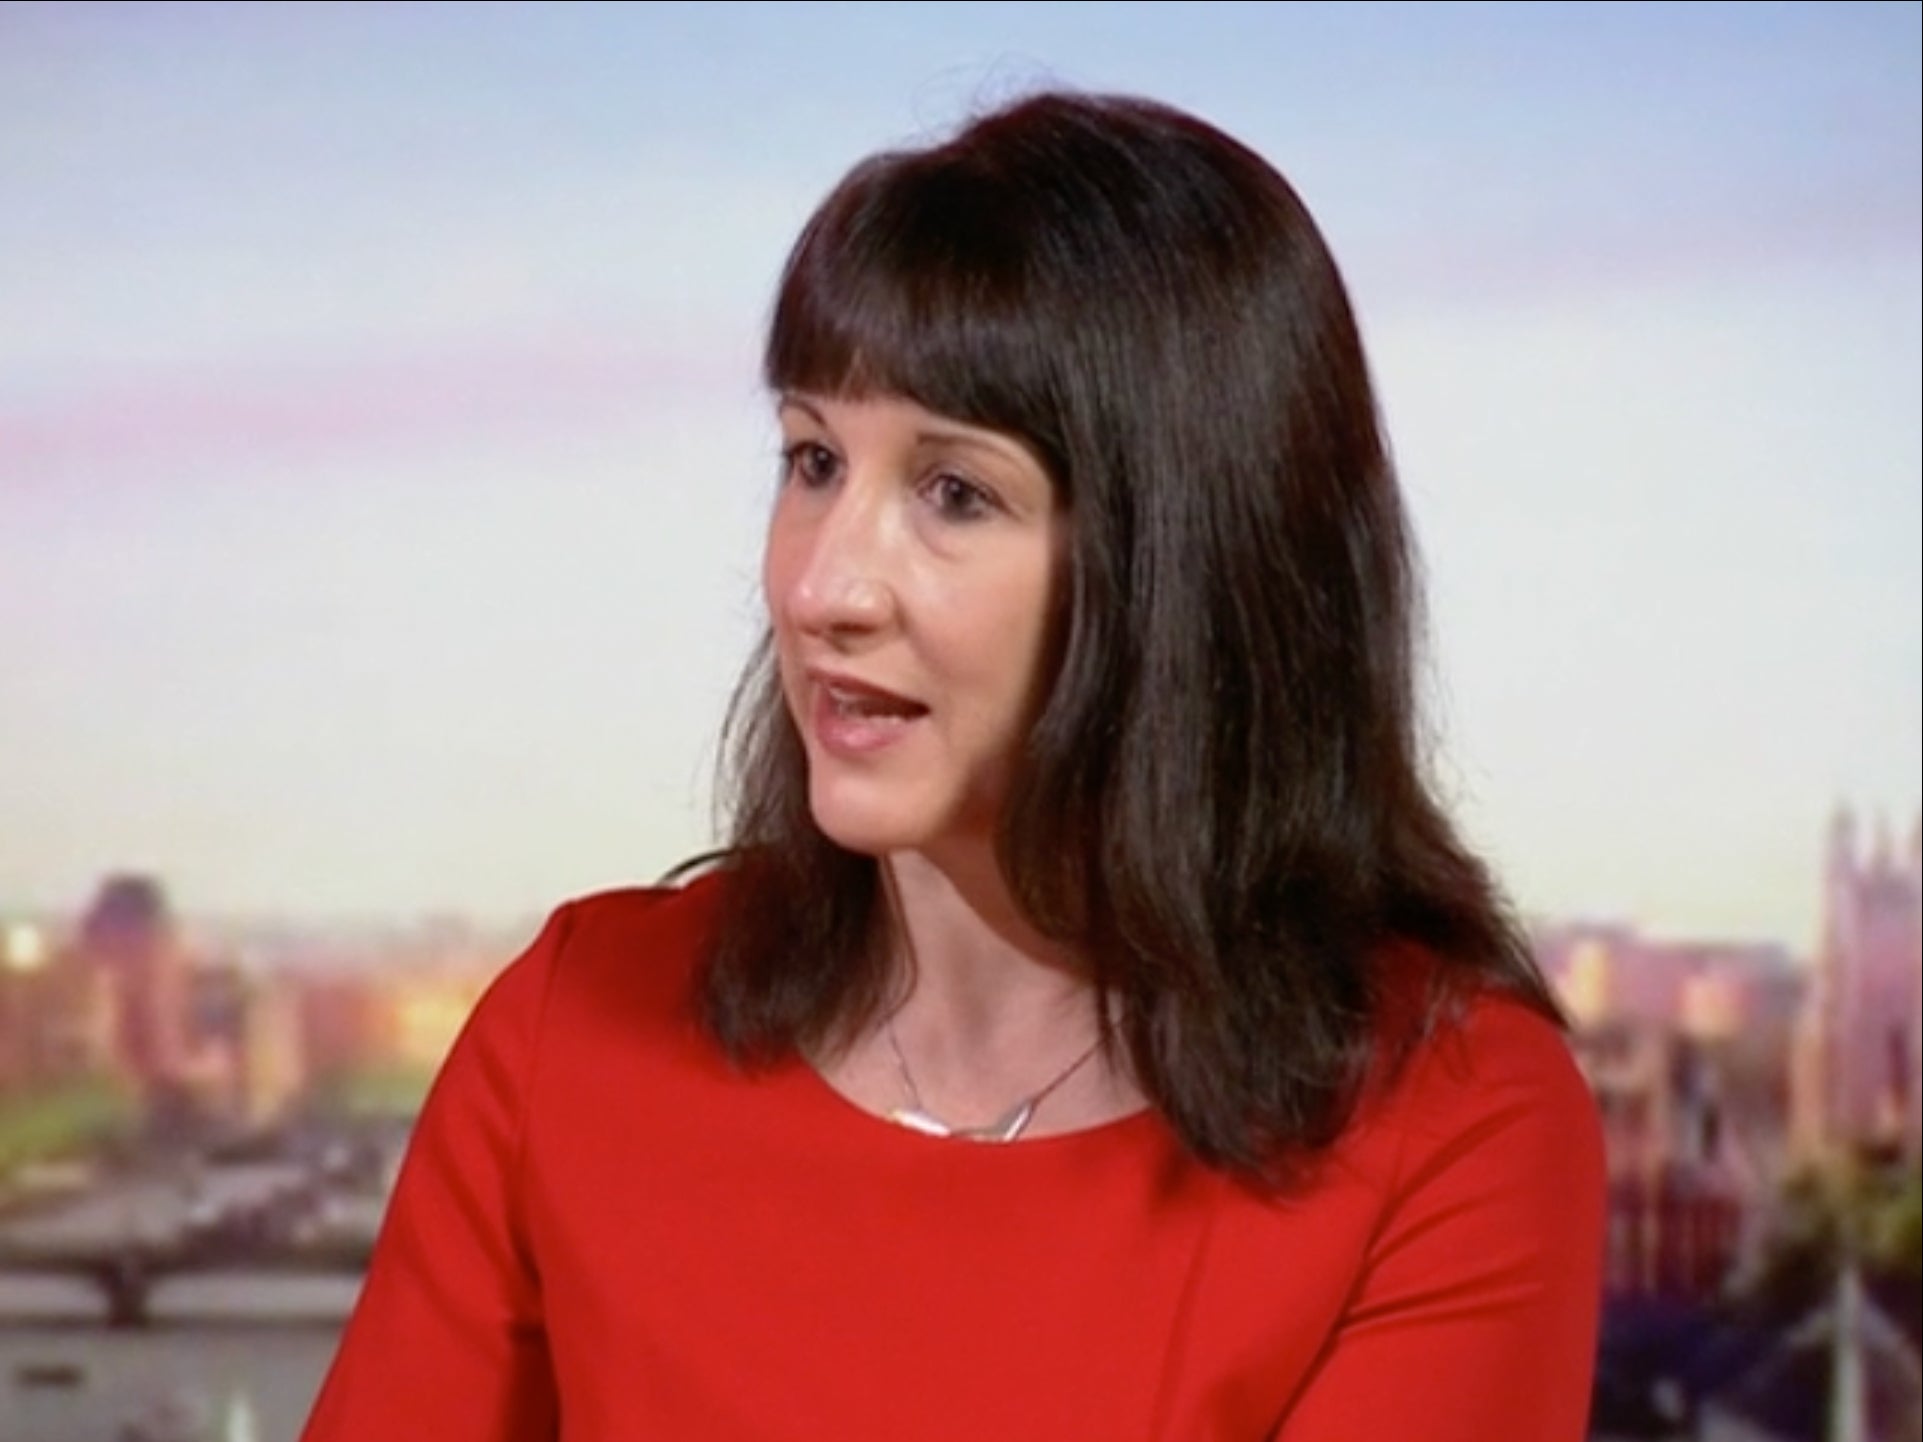 Rachel Reeves, the shadow chancellor, on the Andrew Marr Show on Sunday